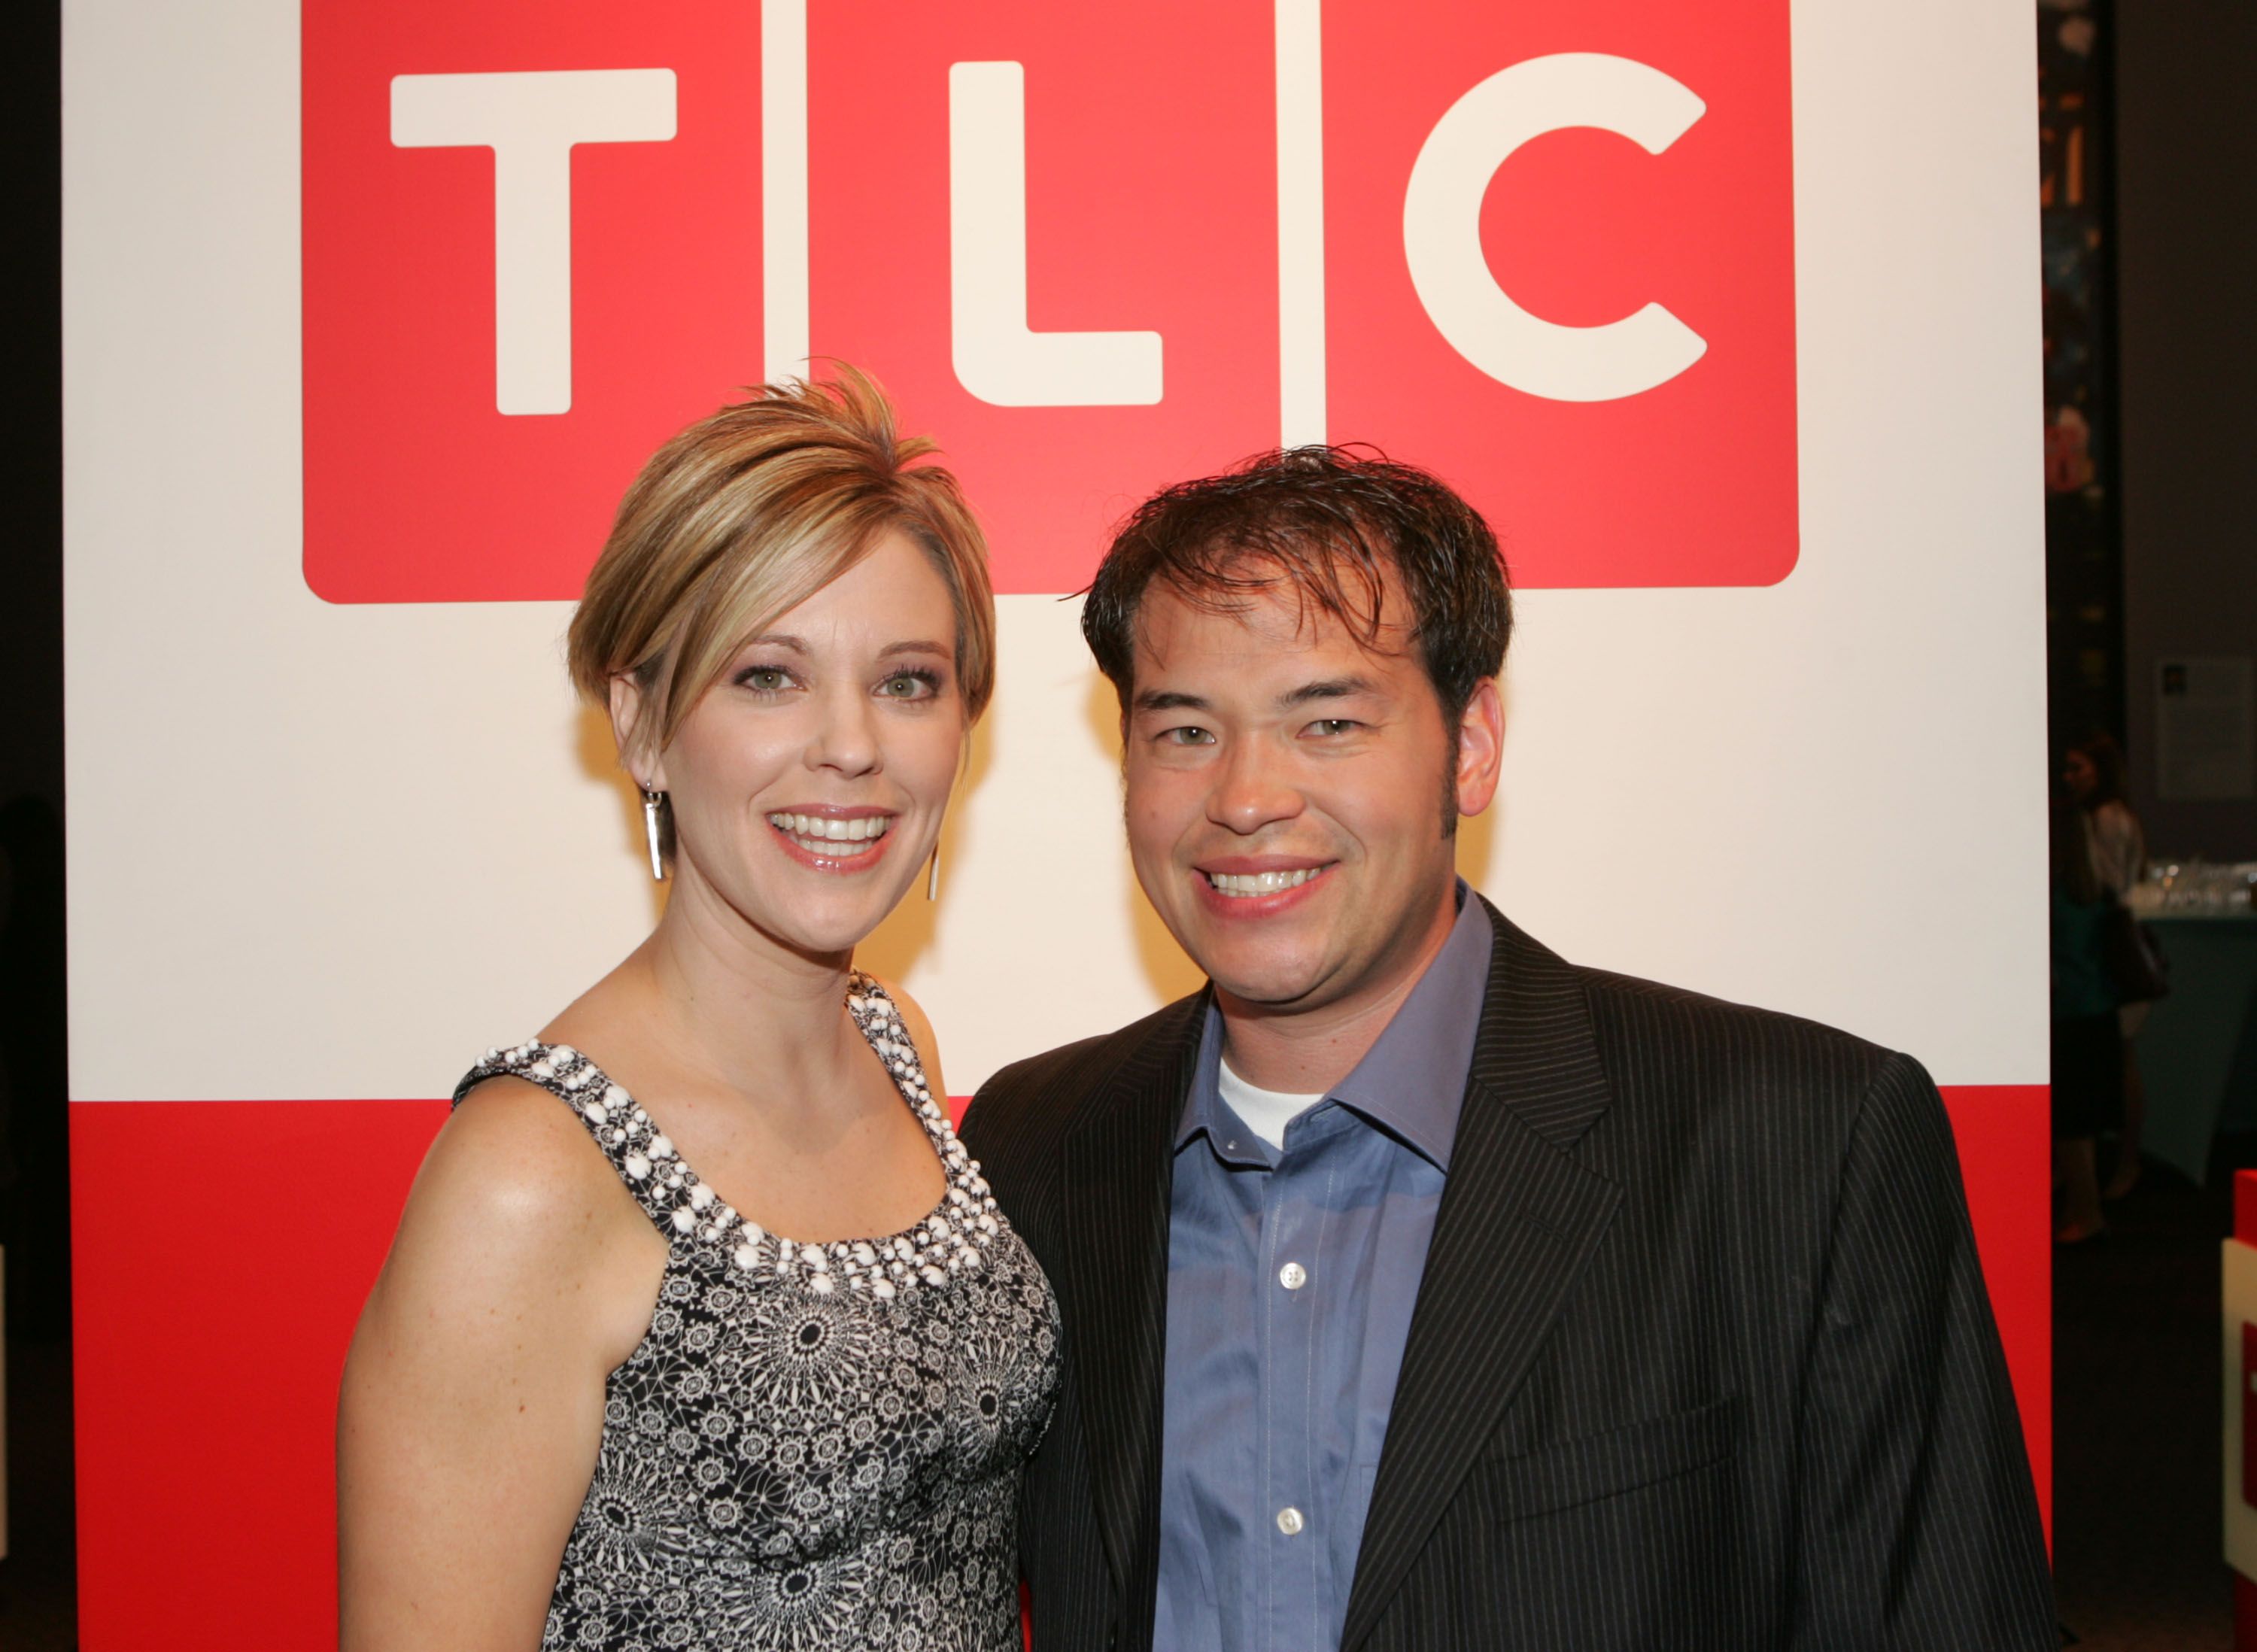 John and Kate Gosselin at the Discovery Upfront Presentation NY - Talent Images event on April 23, 2008, in New York City | Photo: Thos Robinson/Getty Images